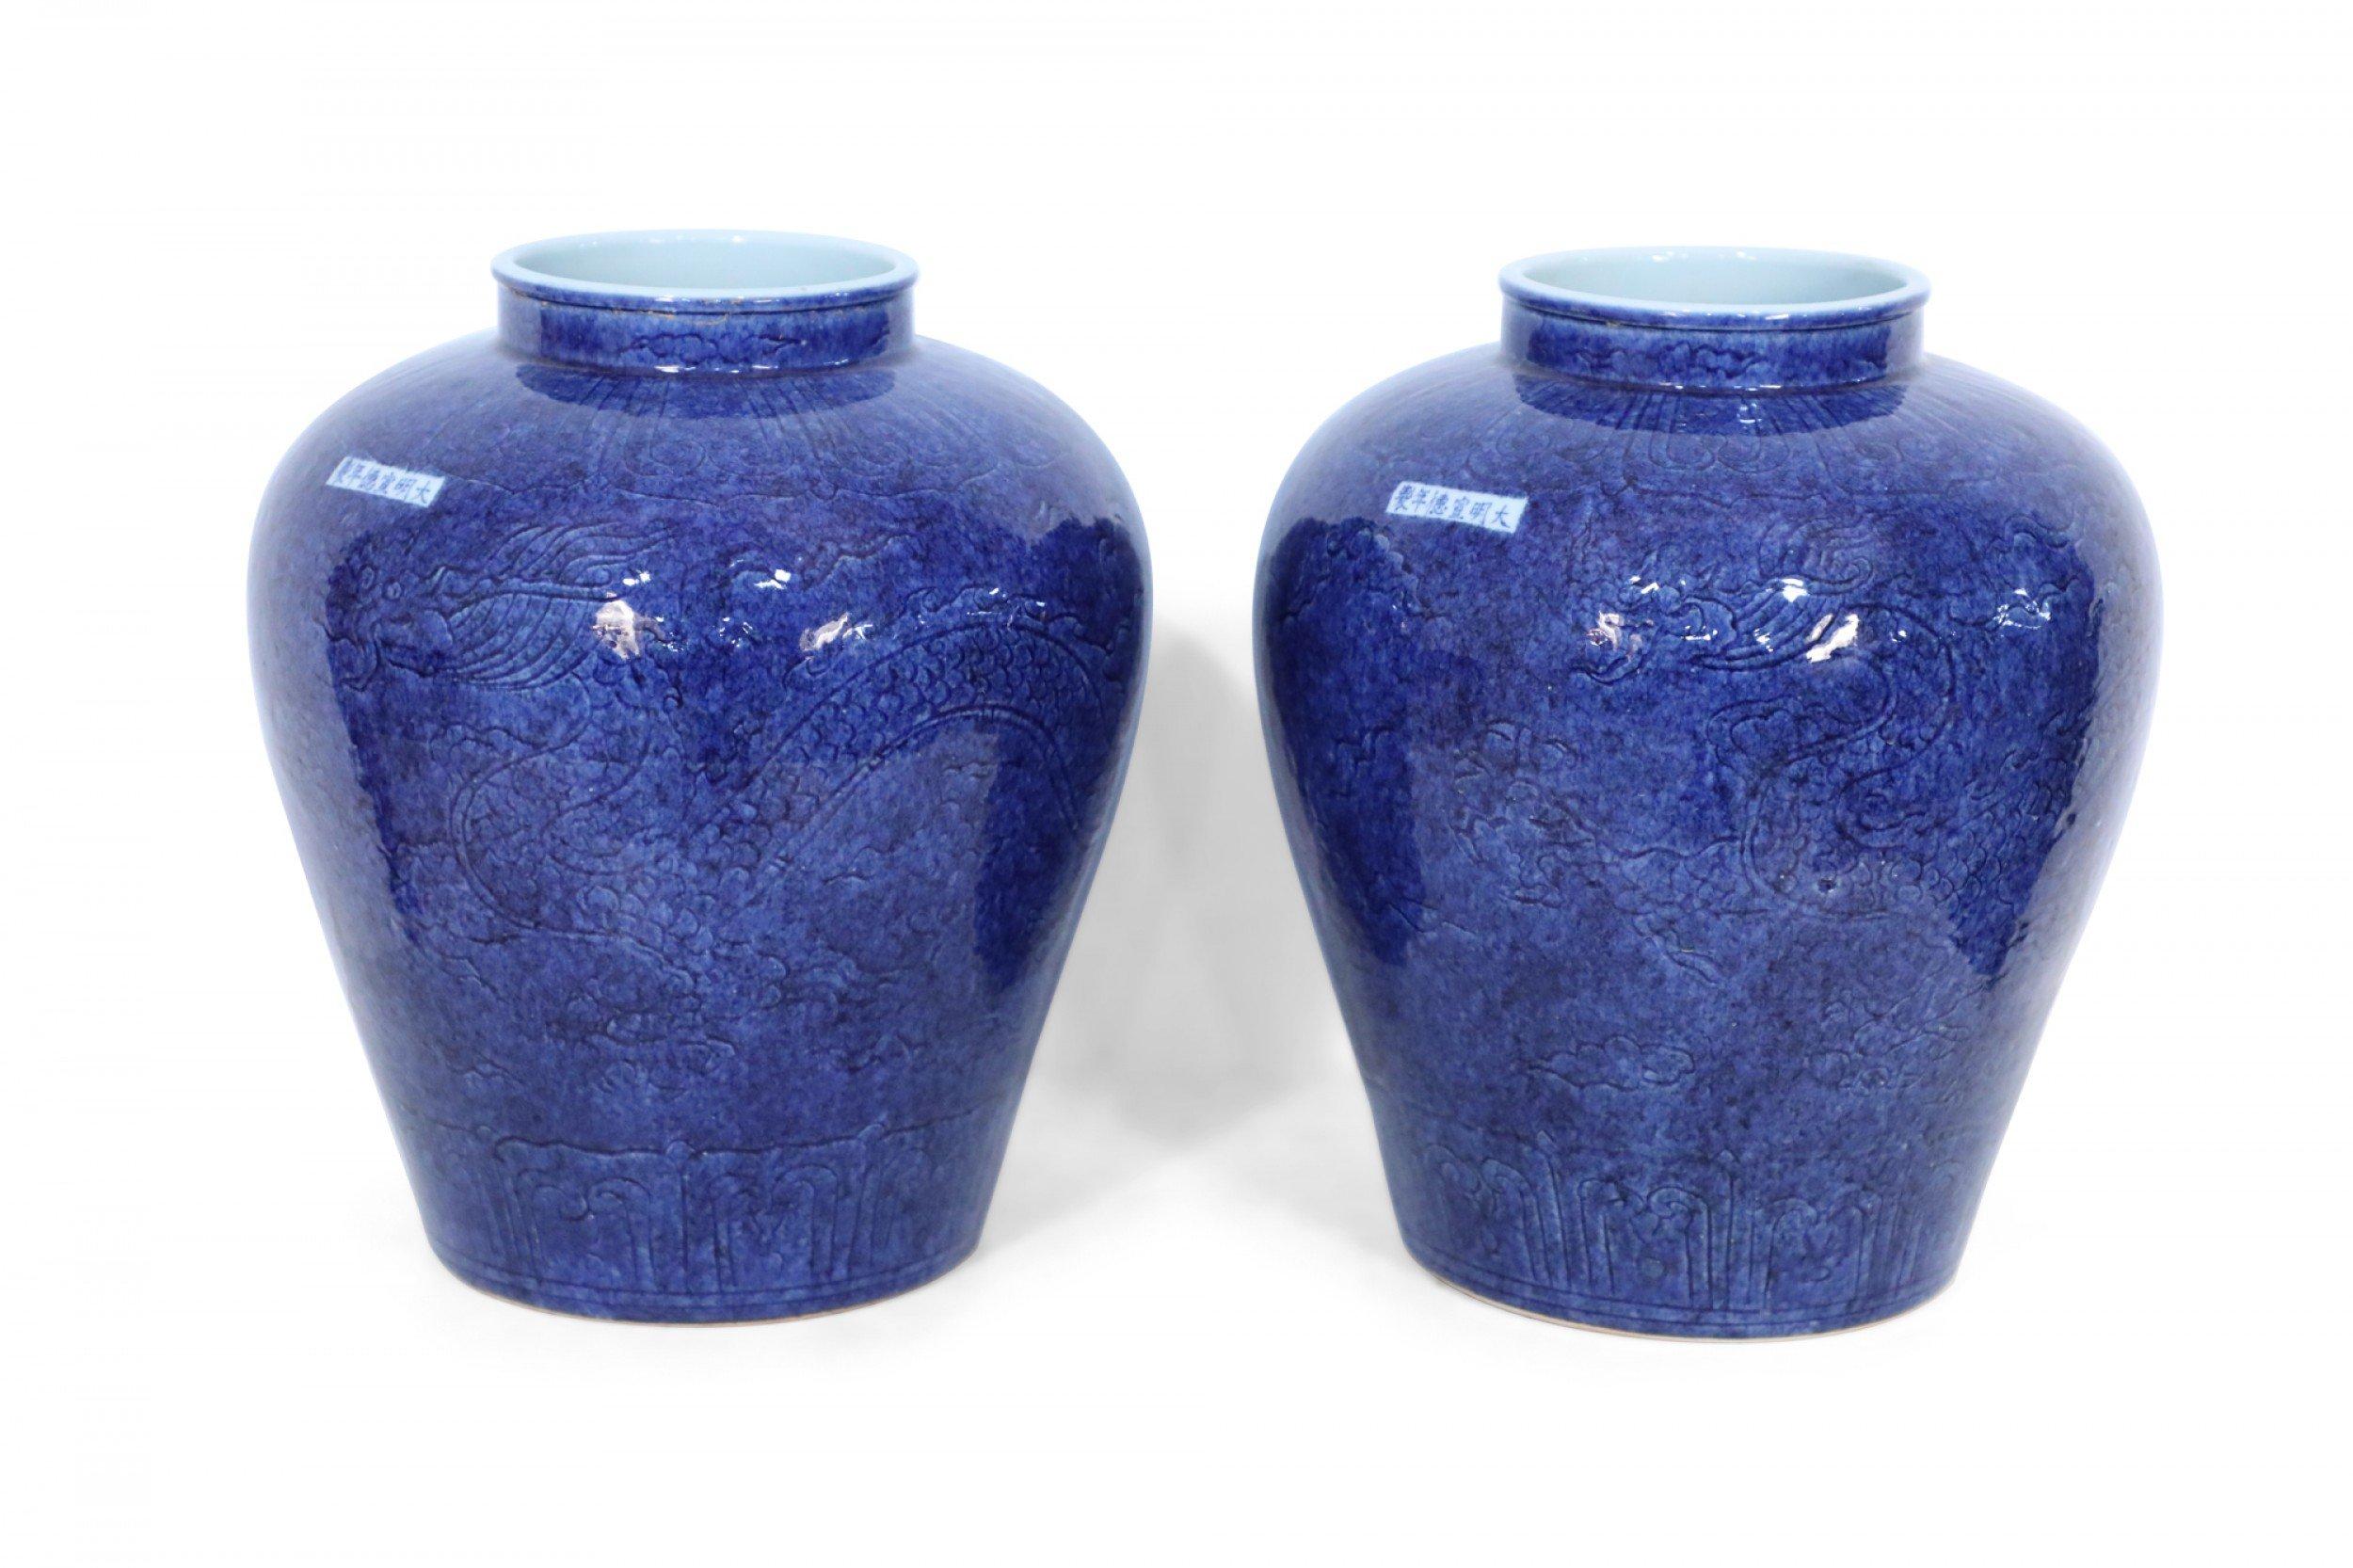 Pair of Chinese cobalt blue vases in ginger jar shapes, covered with incised patterns of dragons and curvilinear designs, and bearing small white rectangles featuring blue characters (priced as pair).
  